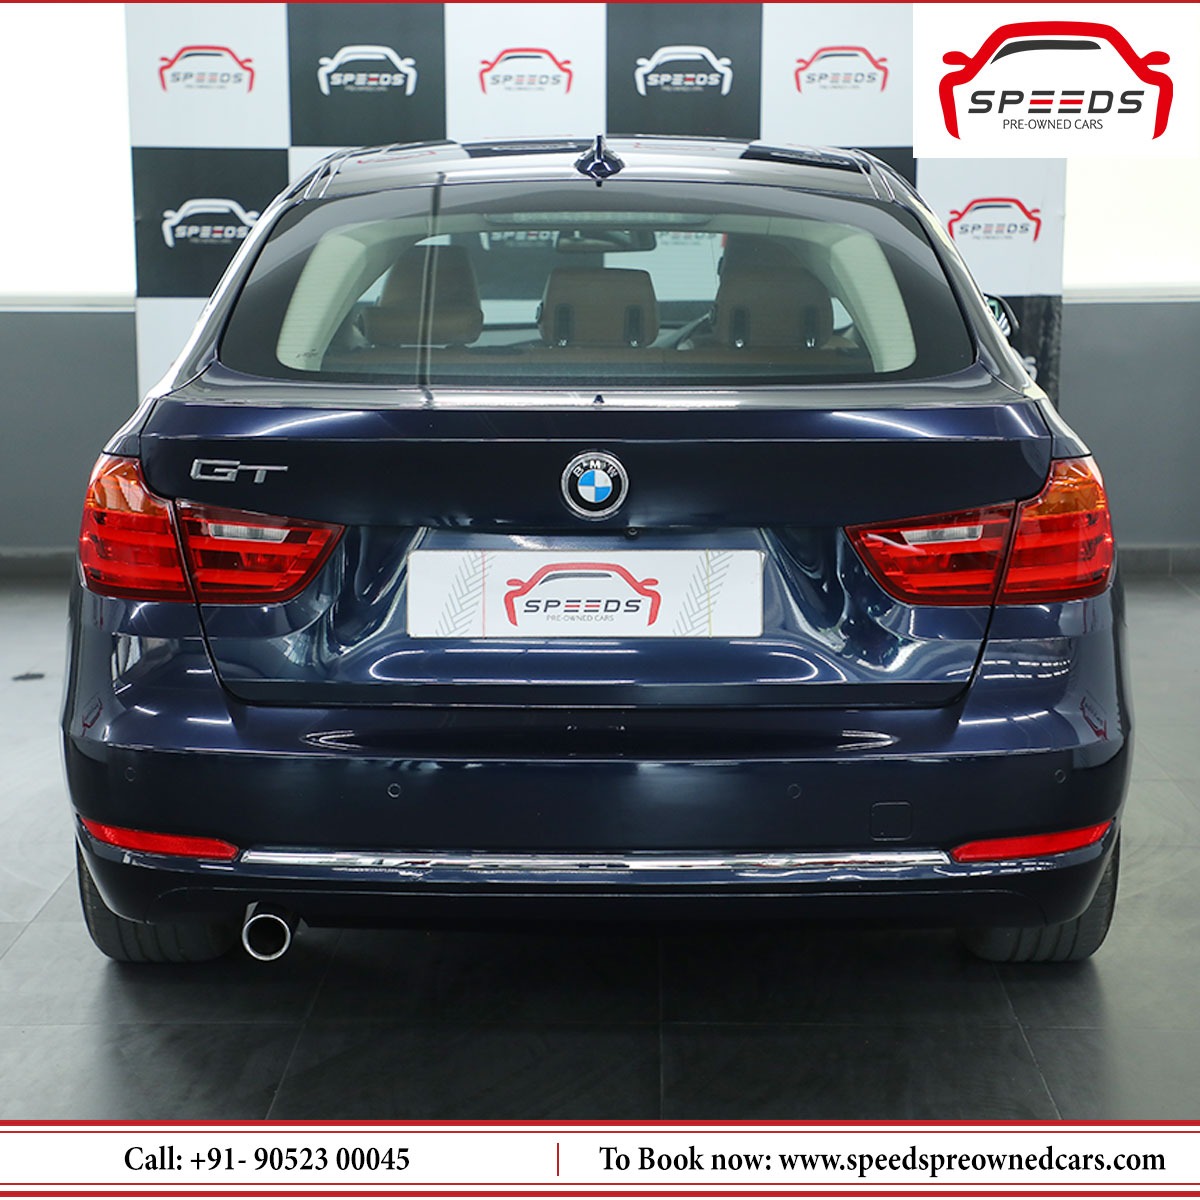 Live the richness of BMW3GT's legendary aesthetic icon that was created to be impressive from every angle. 

Visit Speed's pre-owned cars to own this stunning vehicle!

For more details visit us now:
speedspreownedcars.com
.
#Speeds
#BMW #bmw3gt #hybridusedcars #hybridcars